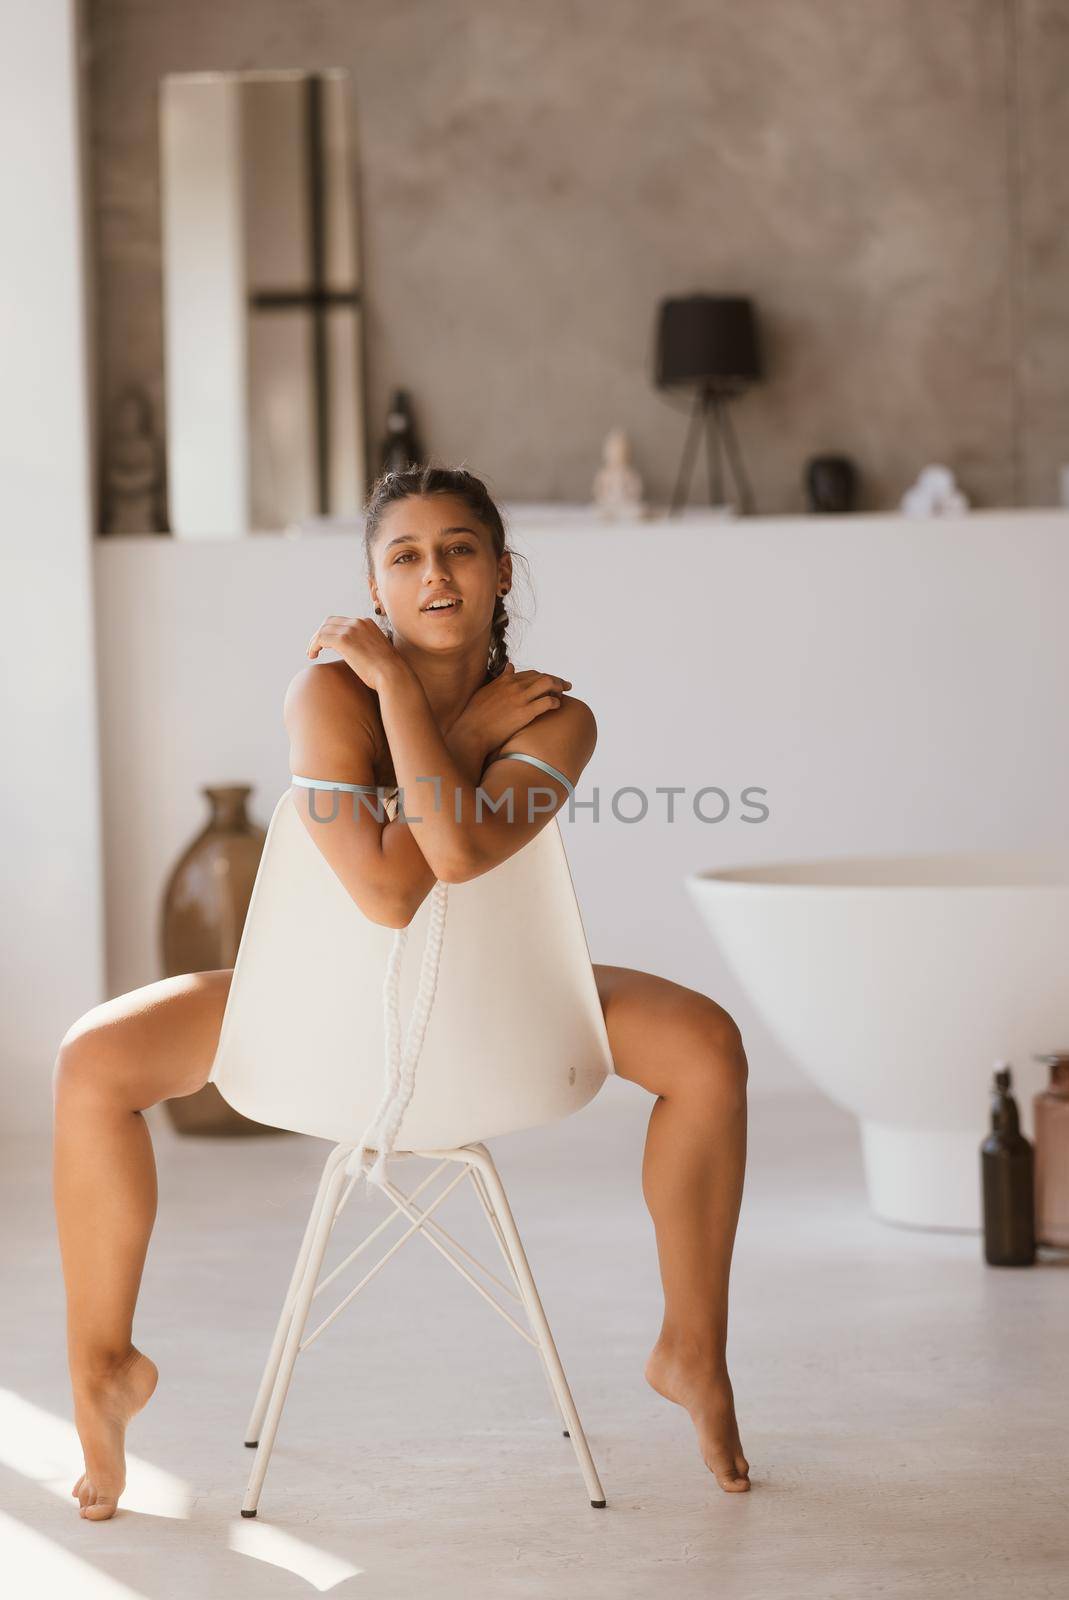 Girl in lingerie sits on a chair and looks at the camera. Poses at the camera.